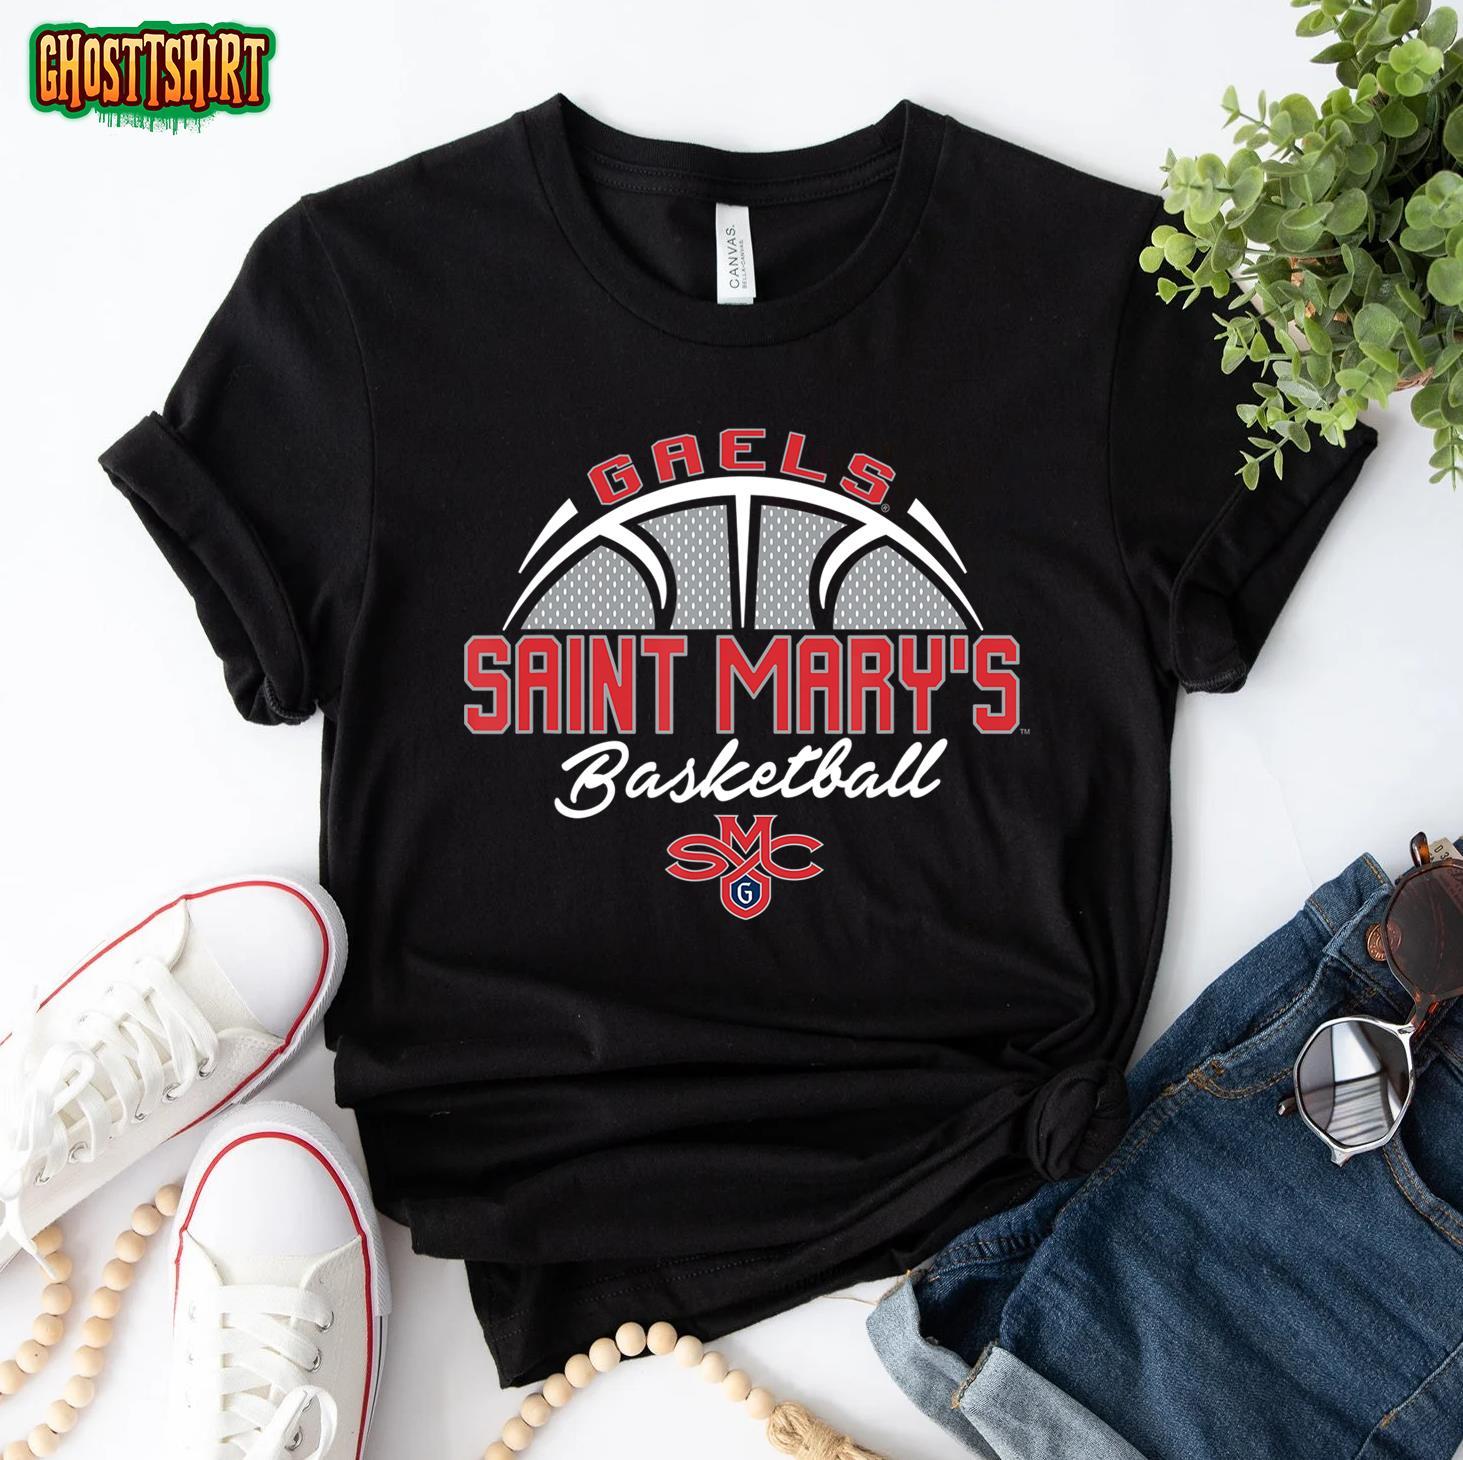 Saint Mary's Gaels Basketball Swish Navy Officially Licensed T-Shirt